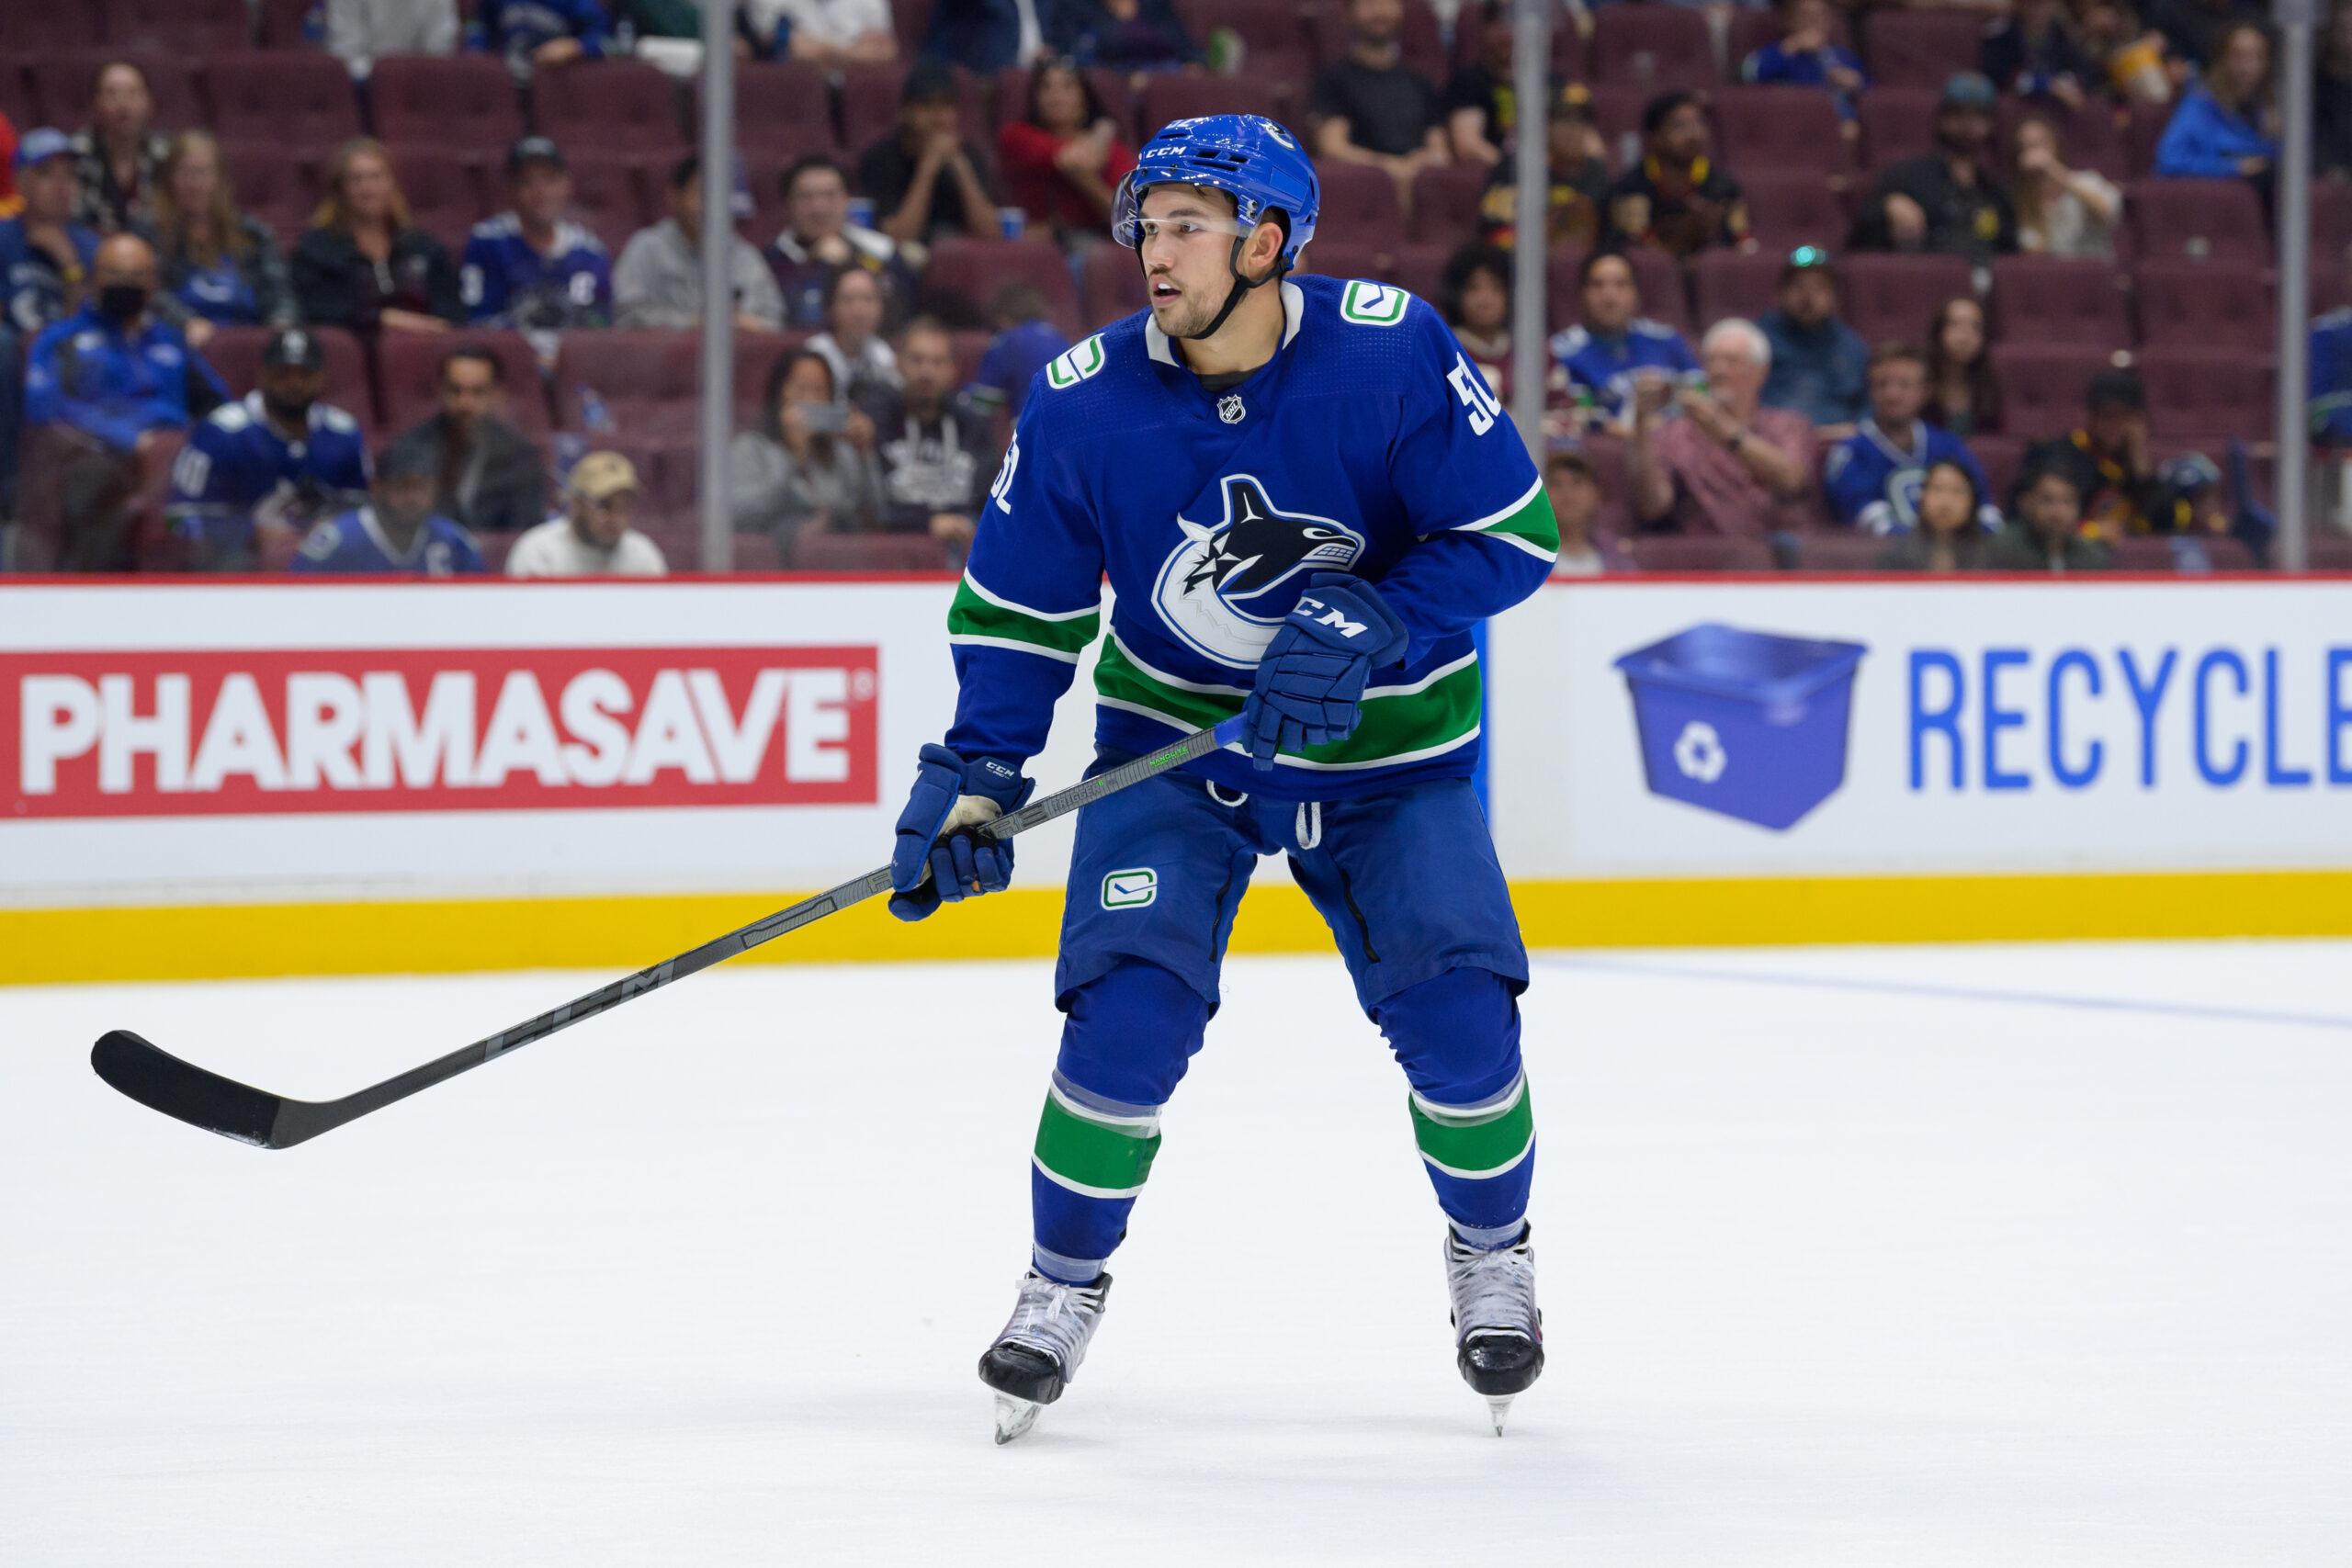 This has been a perfect opportunity for me': A one-on-one with Canucks  prospect Jett Woo after his first month of pro hockey - CanucksArmy